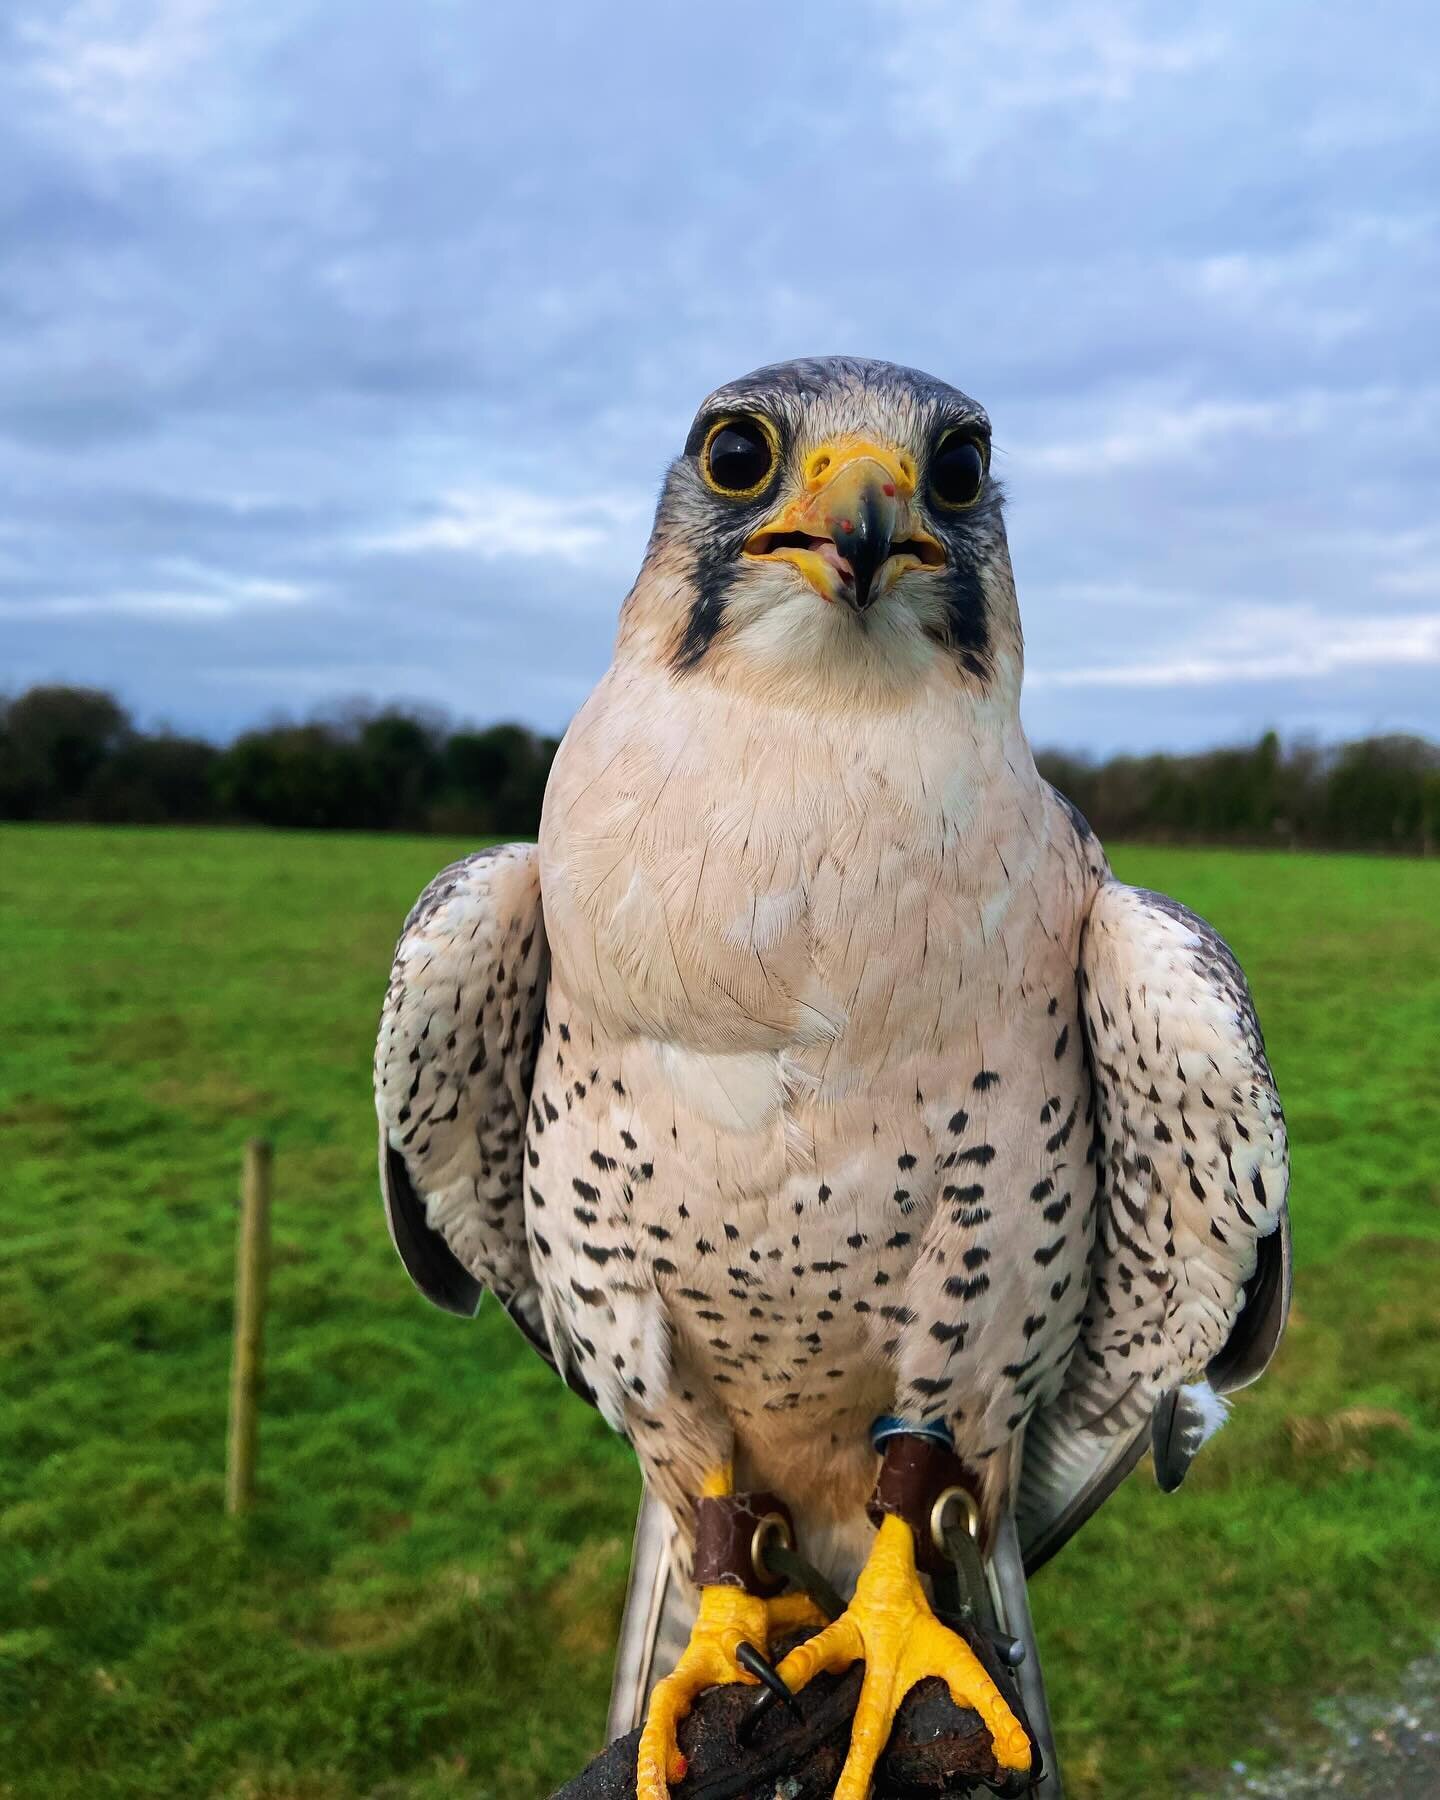 Peter our #lannerfalcon . You can see his crop or &lsquo;craw&rsquo; is full of food! Birds of prey can store food here for digestion later. During digestion, the meat separates from the fur/feather and bone. This indigestible material is regurgitate